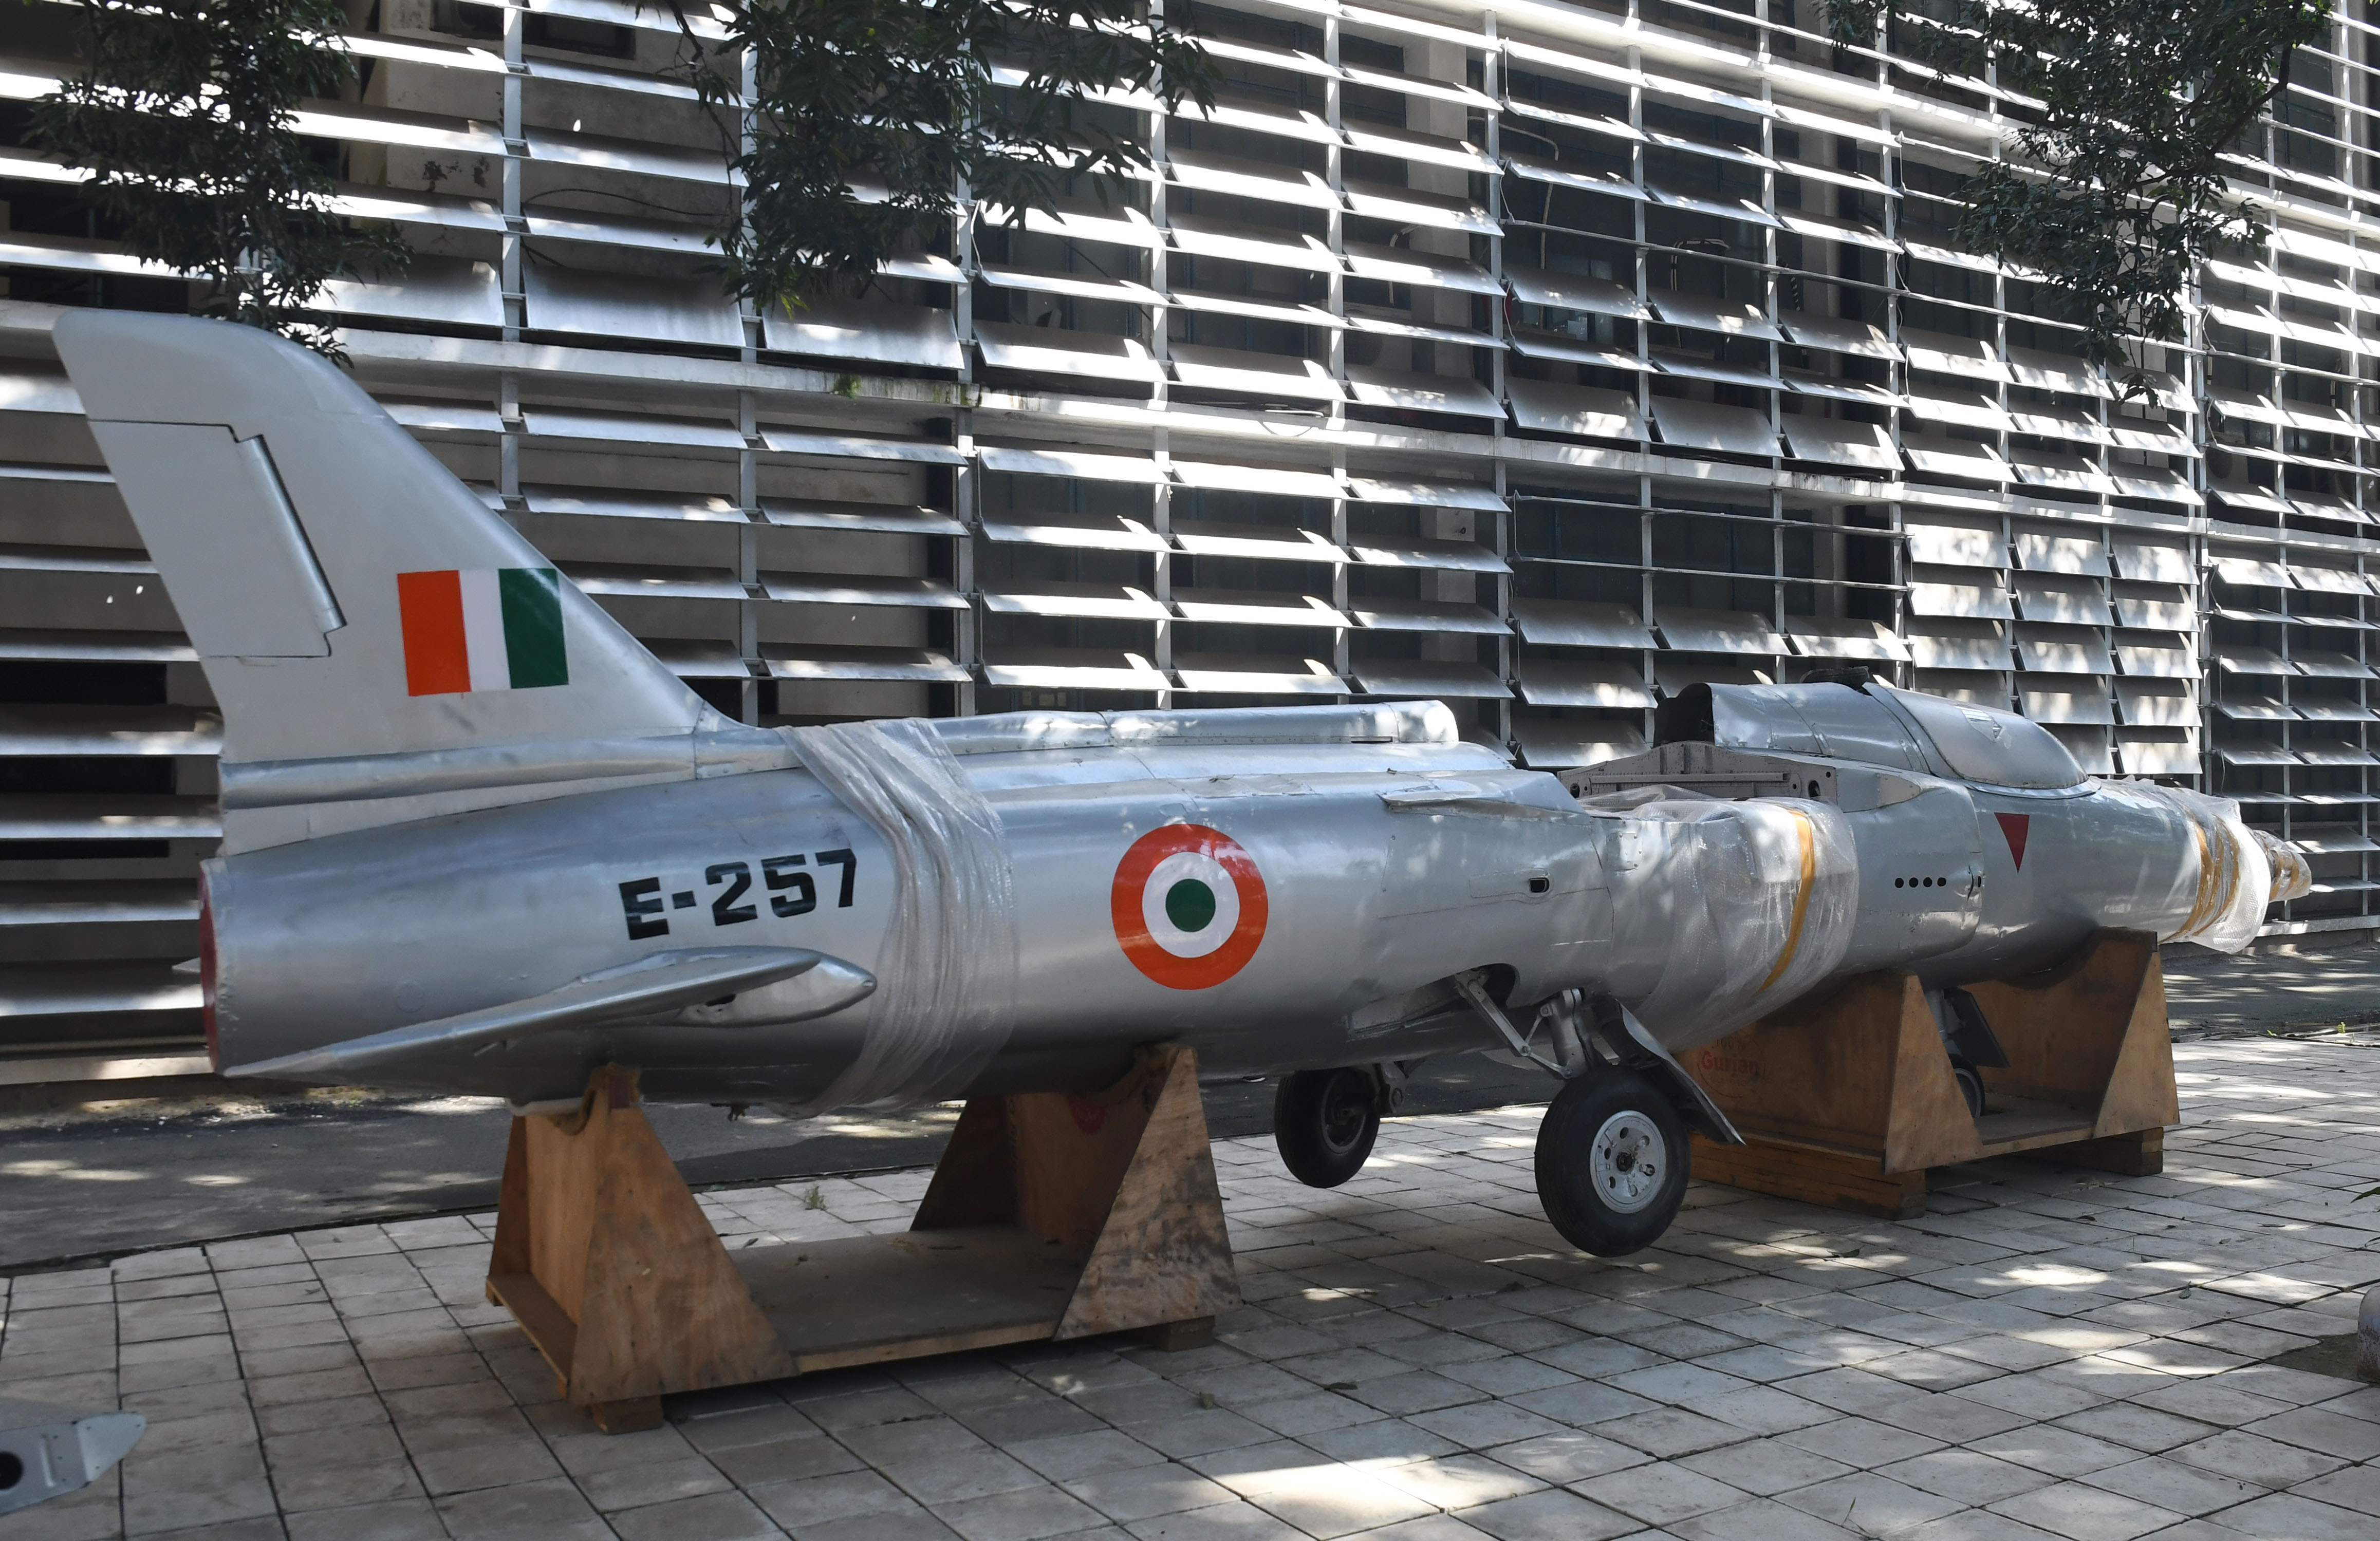 Coming soon, MiG-27 at IAF Heritage Centre in Chandigarh